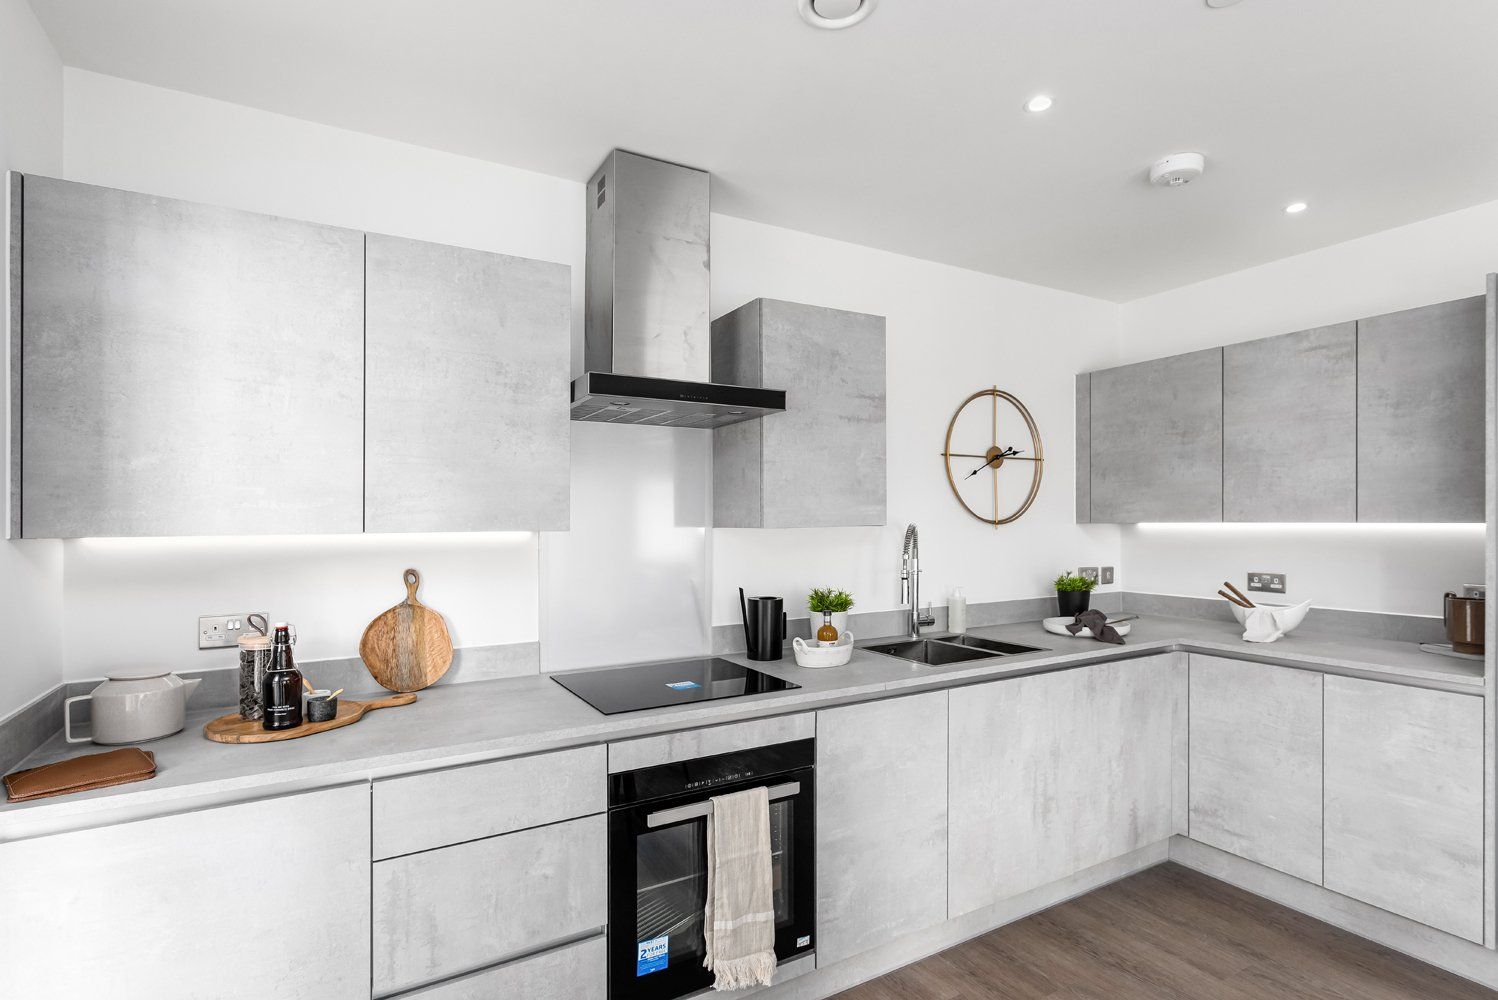 New Union Wharf Shared Ownership Kitchen